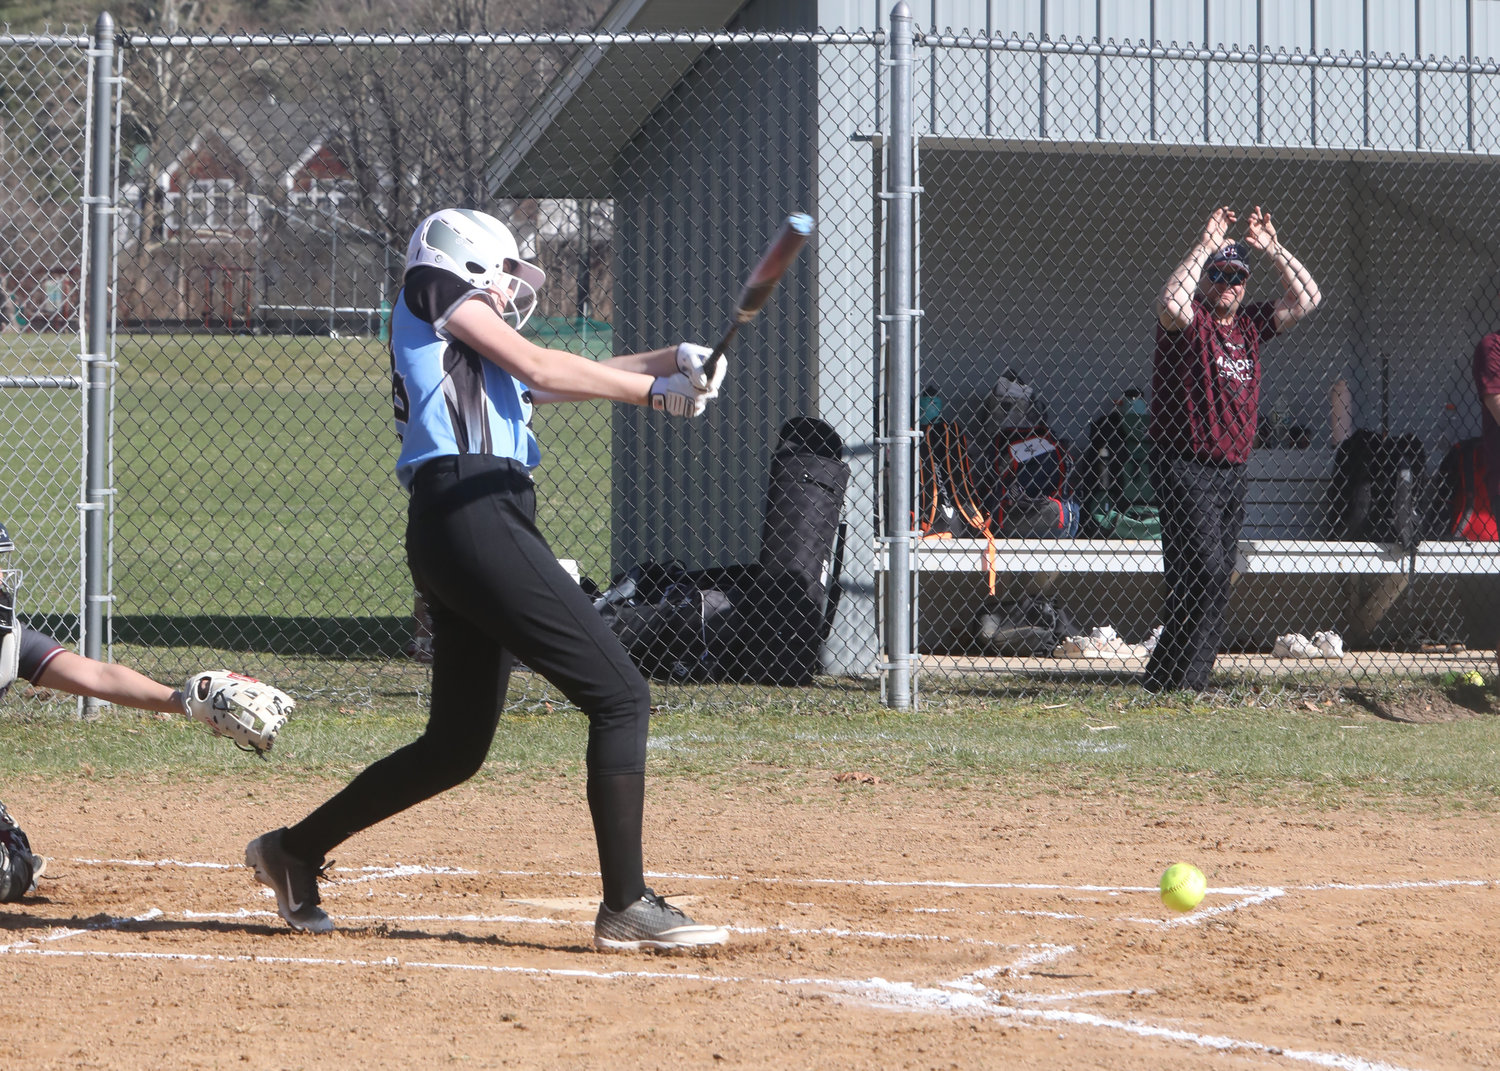 Elanie Herbert, a Sullivan West catcher, connects with a pitch in a non-league game against Livingston Manor.